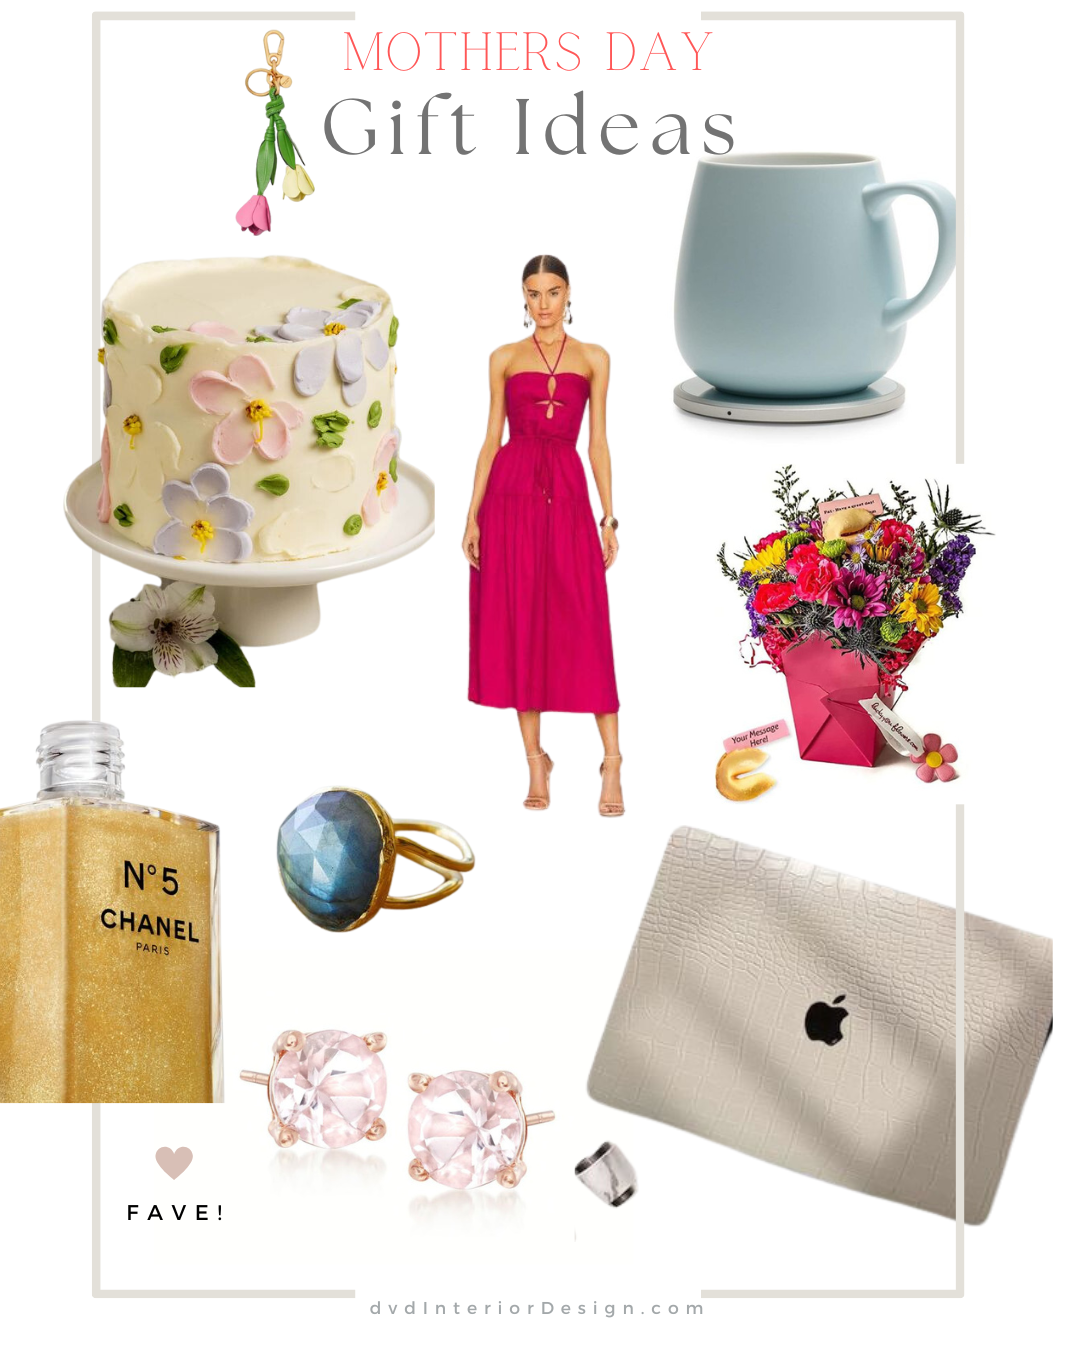 Weekly Obsessions - Mothers Day Gifts  Outfits & Accessories — dvd  Interior Design - Deborah von Donop